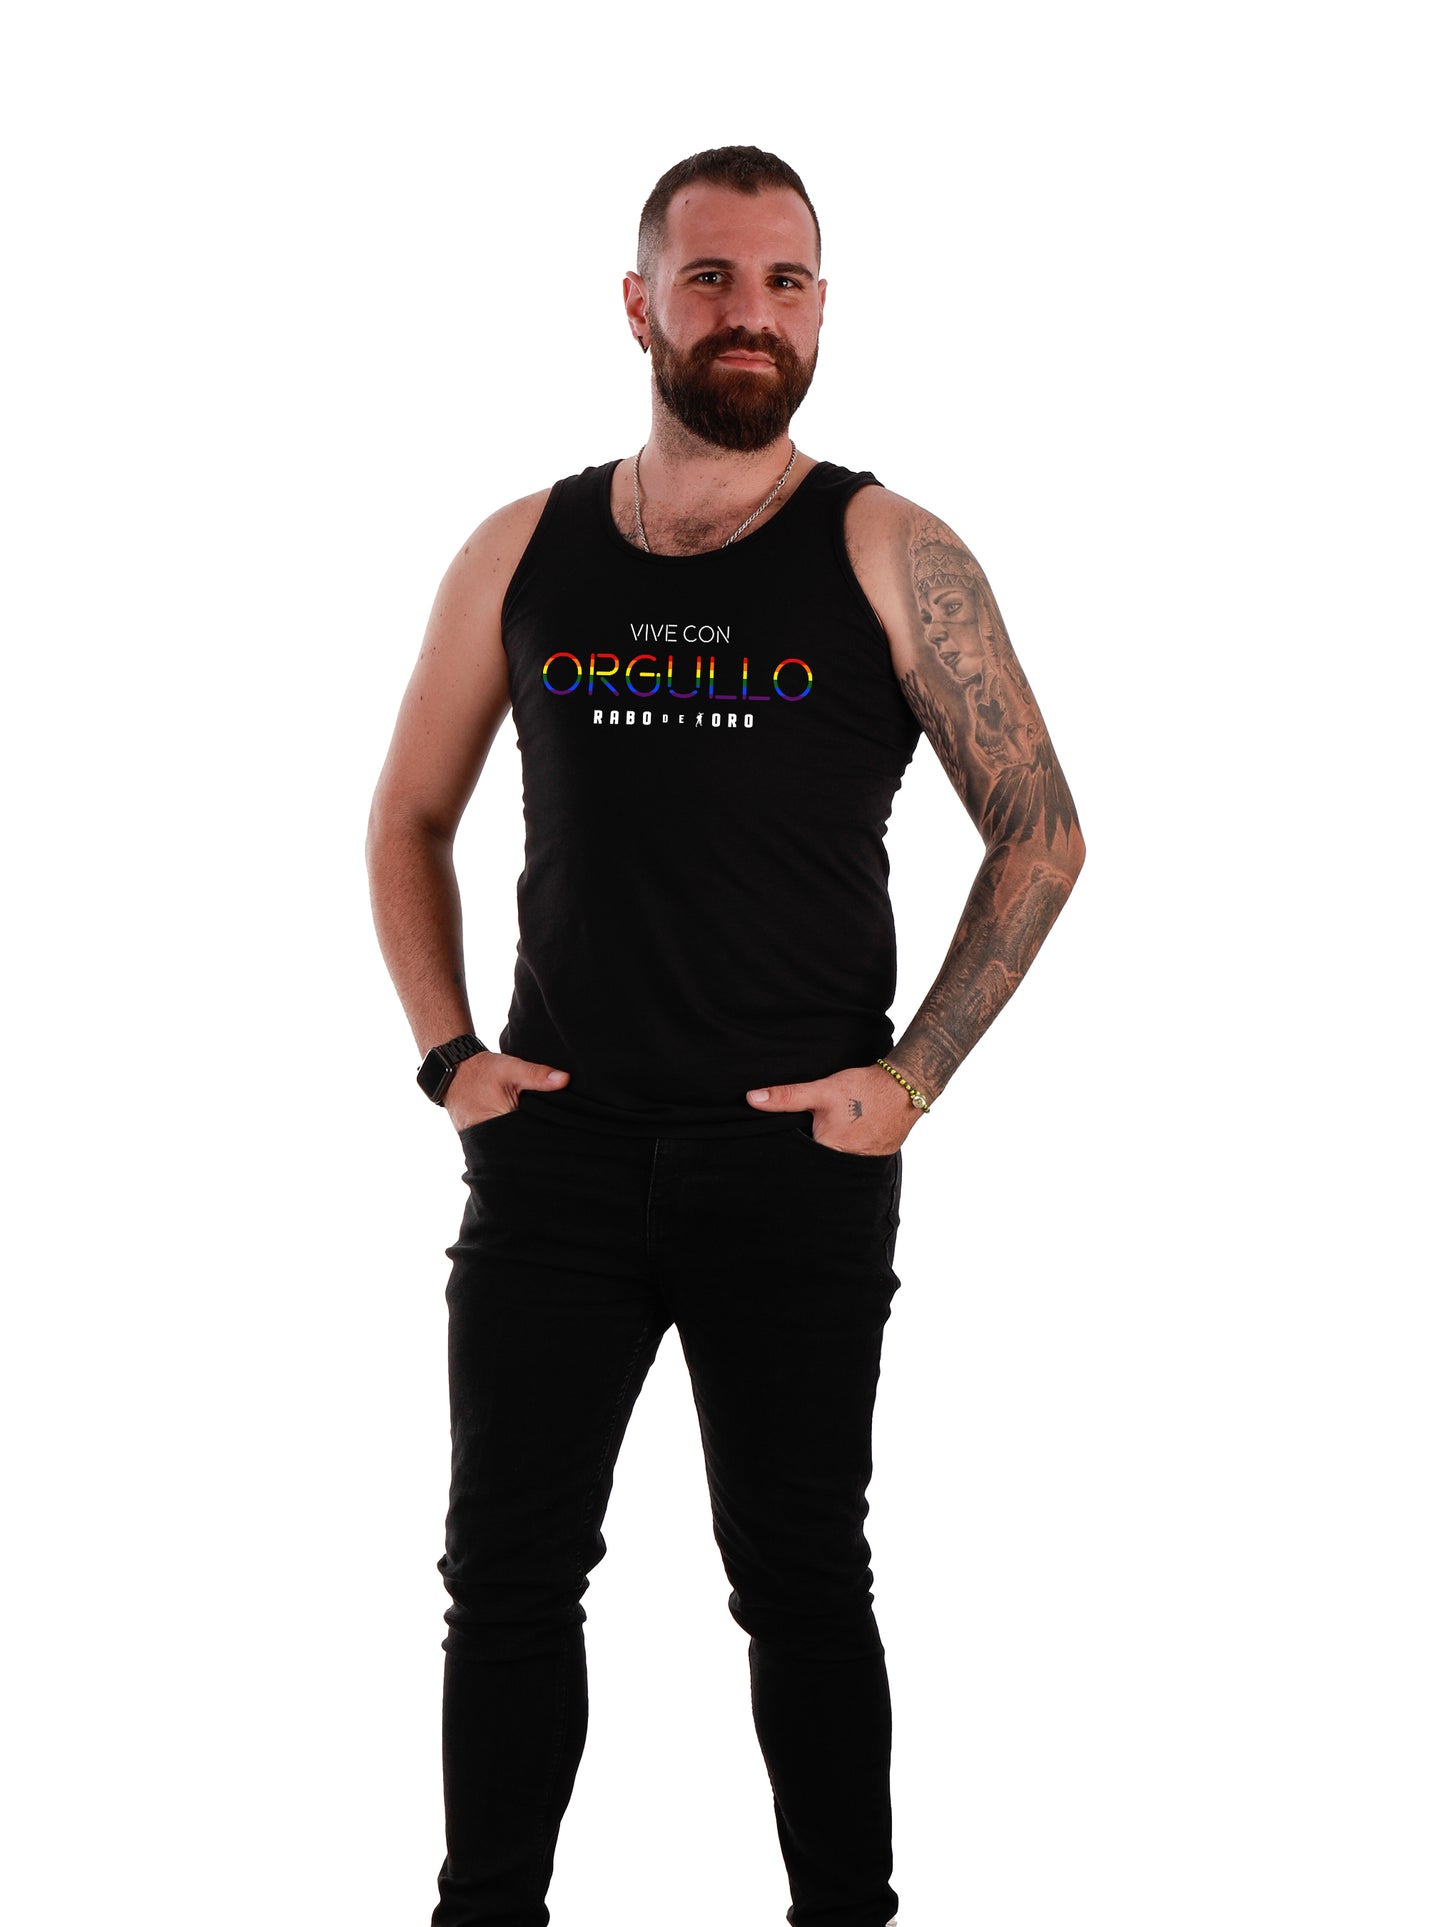 LIVE WITH PRIDE Gay Fetish Black Tank Top with Rainbow/Gay Flag details